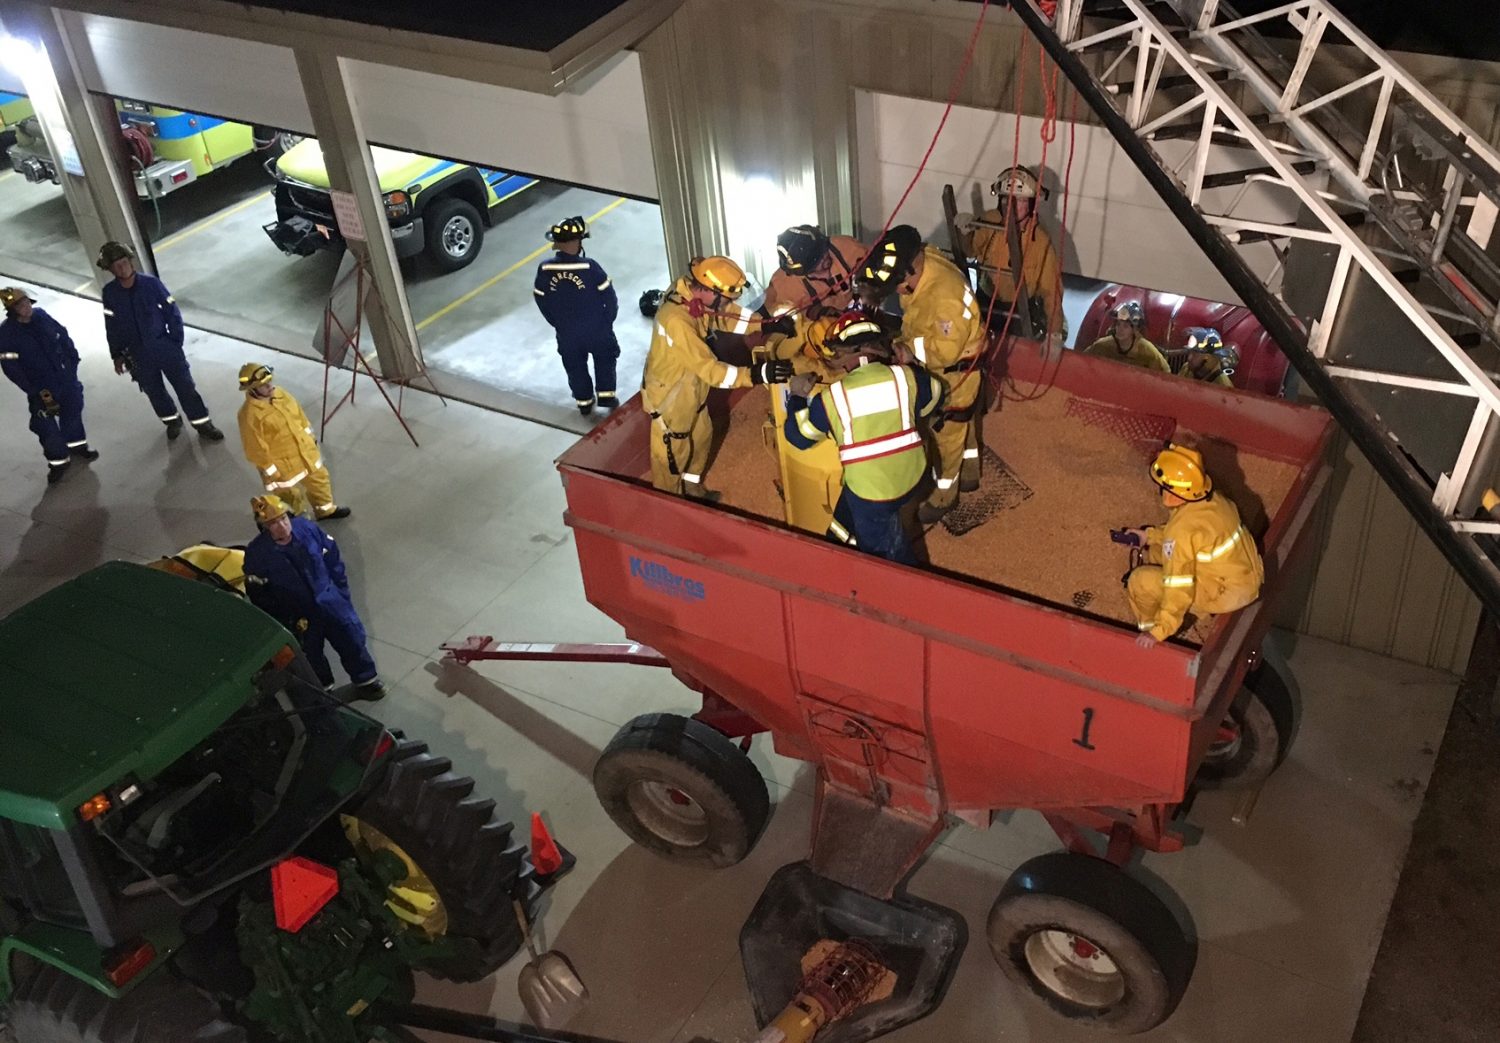 Members of local fire and rescue teams work to free a “victim” from a grain bin during a collaborative training session held at the Pittsville Fire Department on Sept. 25.